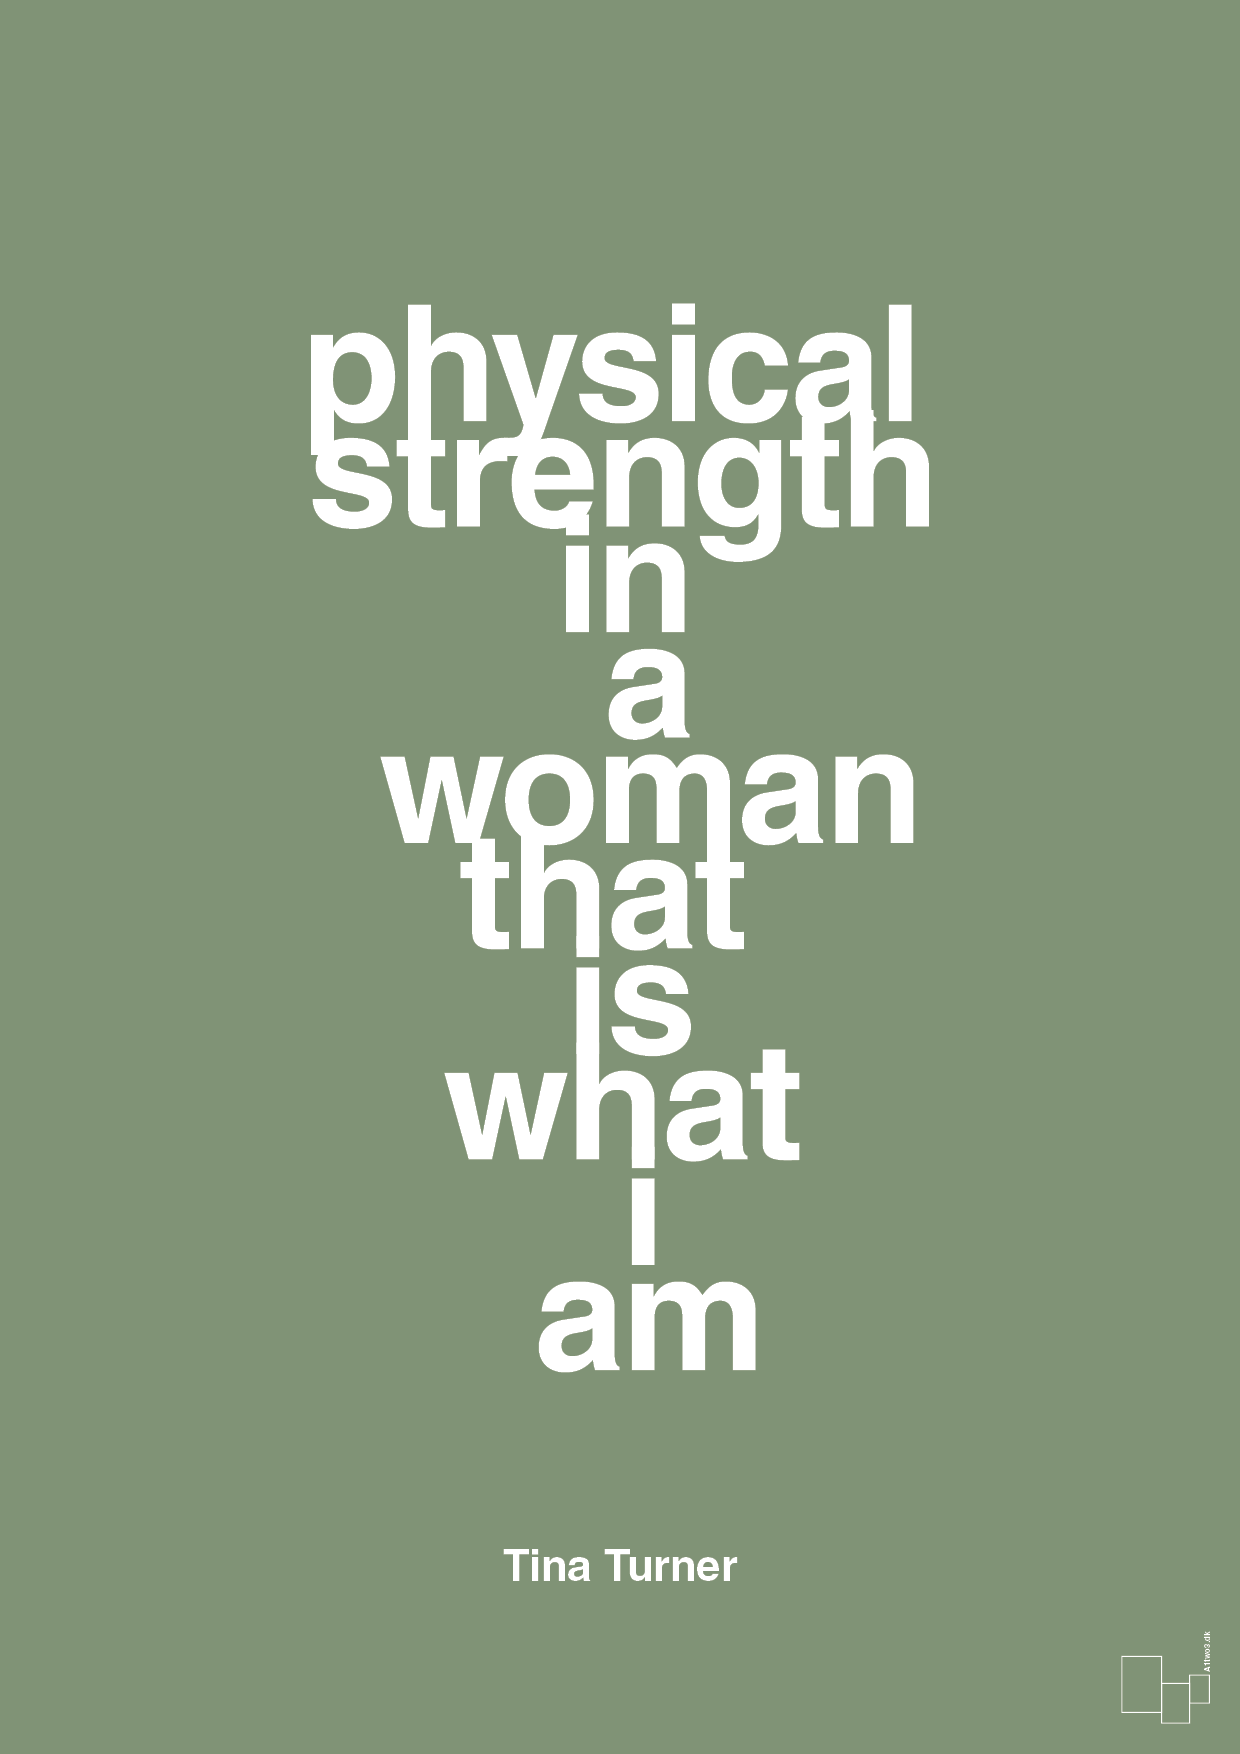 physical strength in a woman that’s what I am - Plakat med Citater i Jade